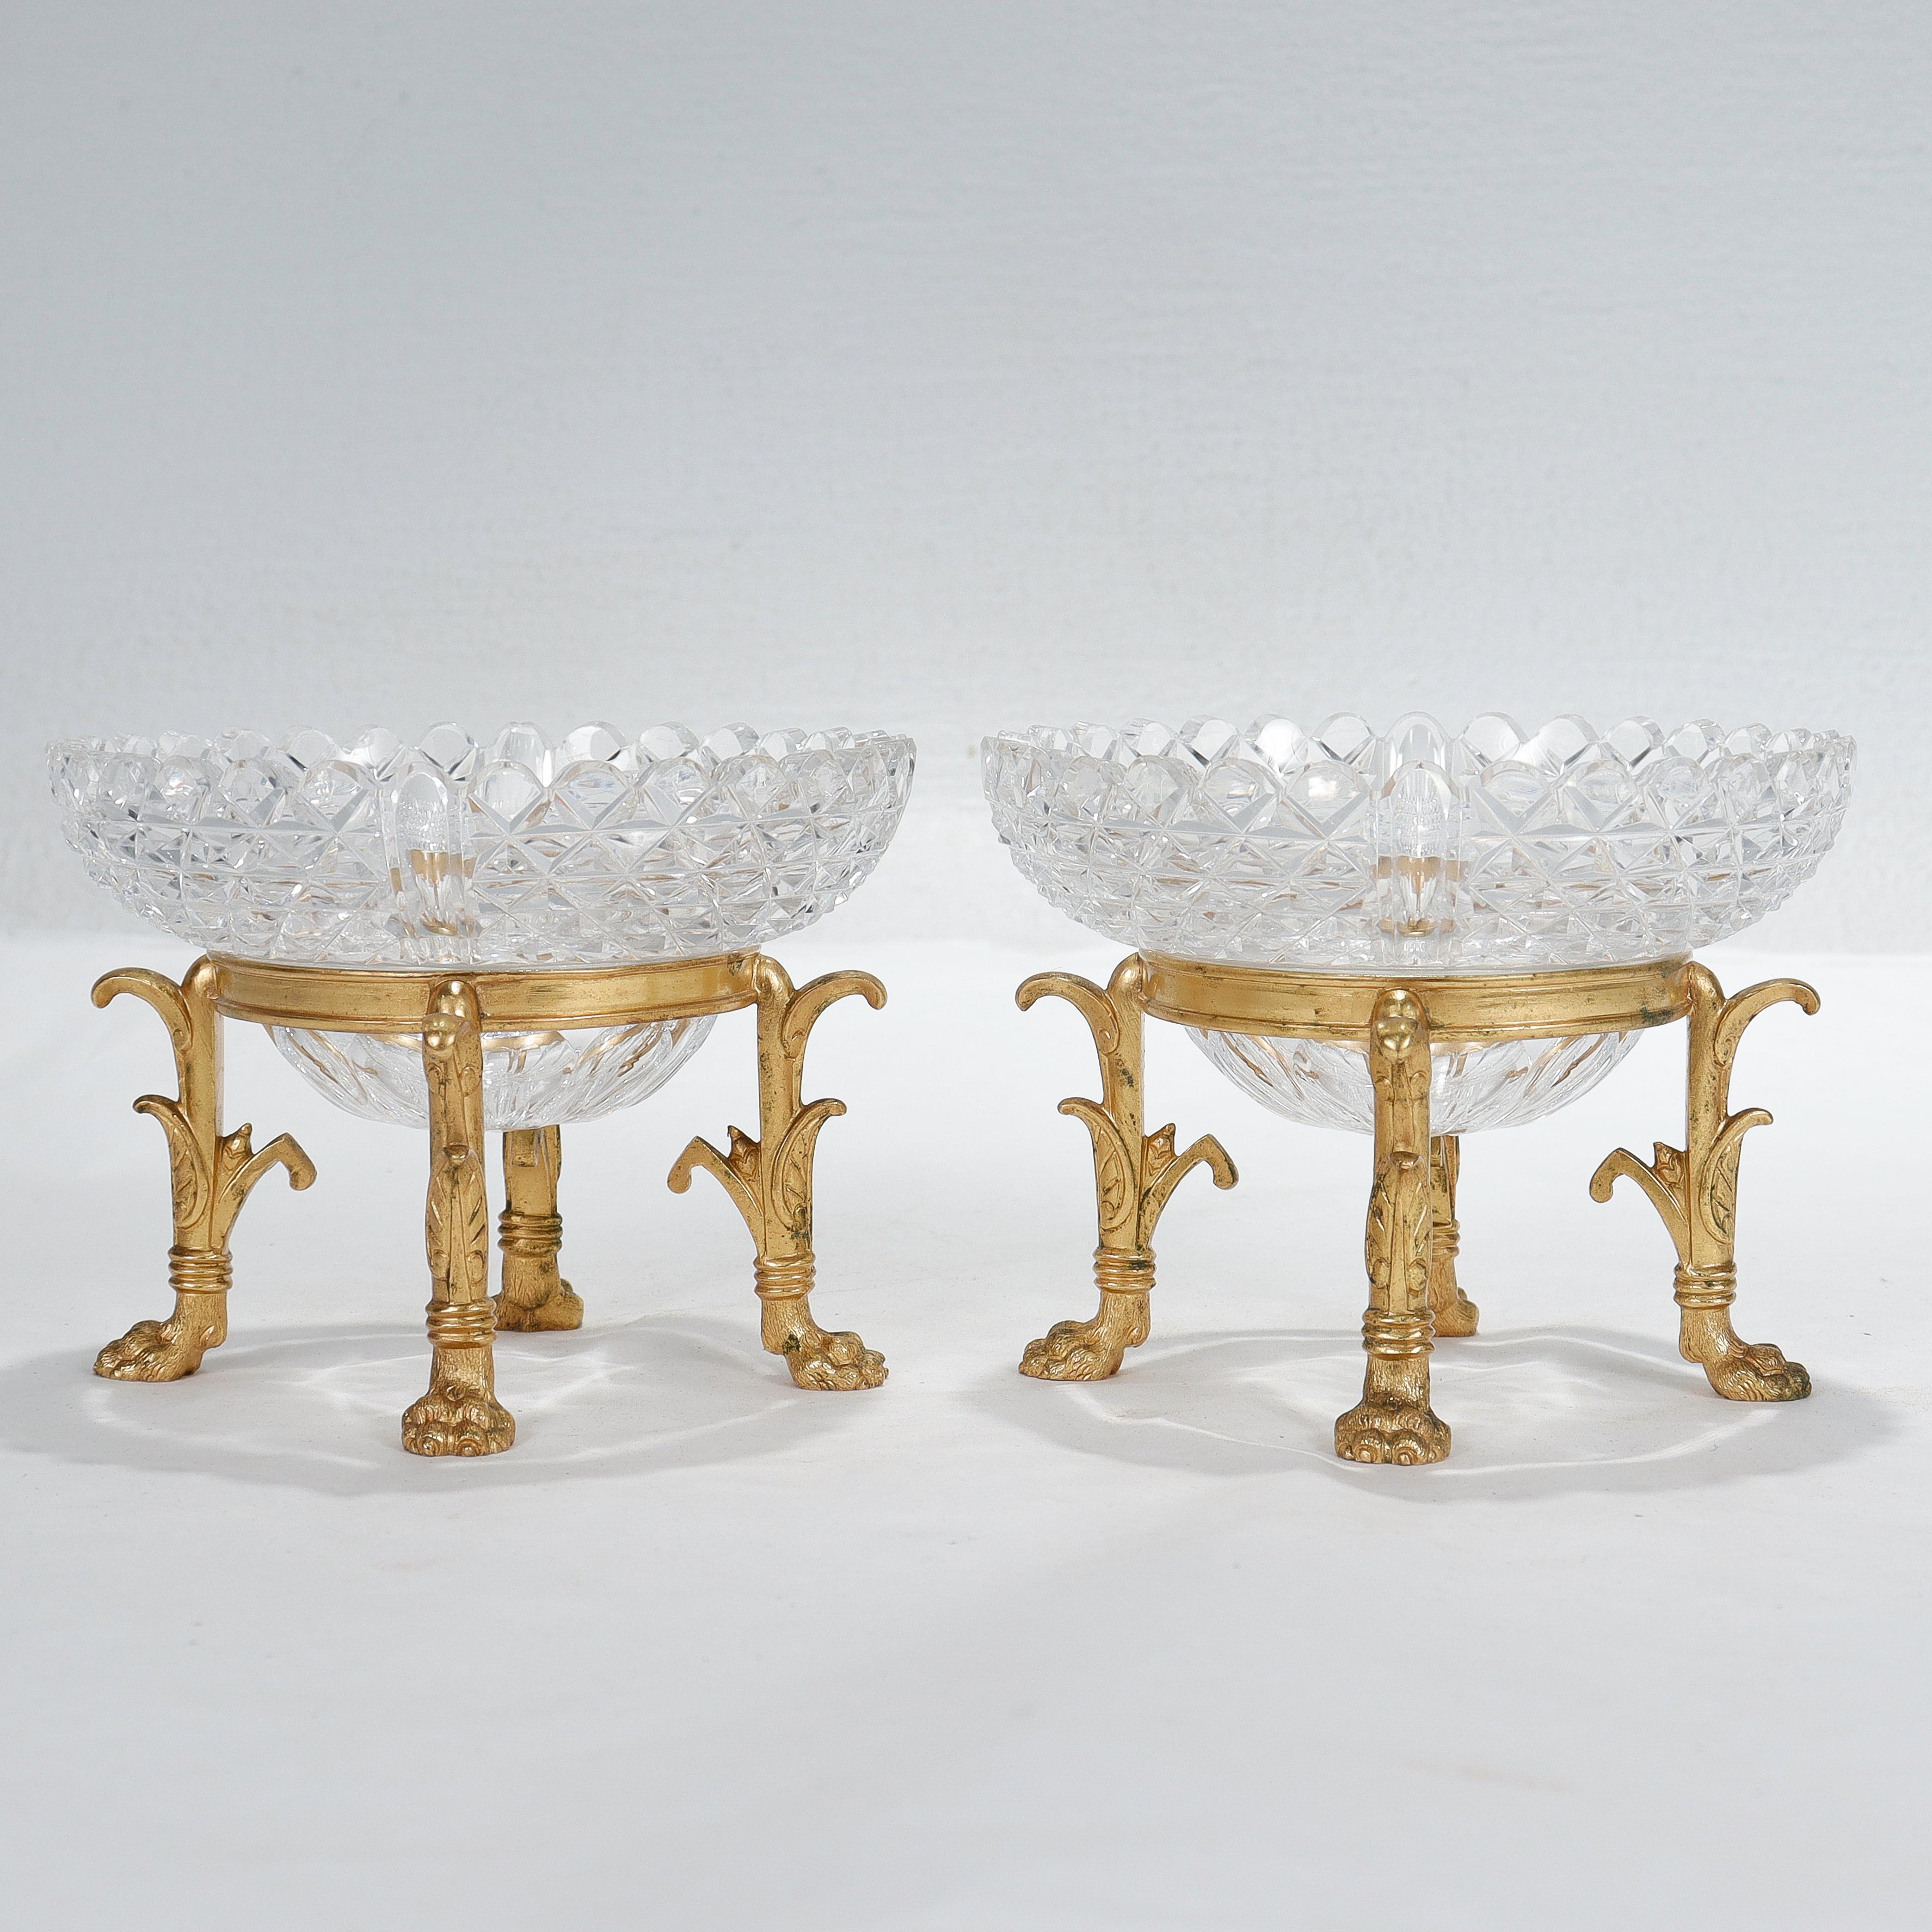 Pair of Gilt Bronze & Cut Glass Footed Bowls Attributed to F. & C. Osler 2